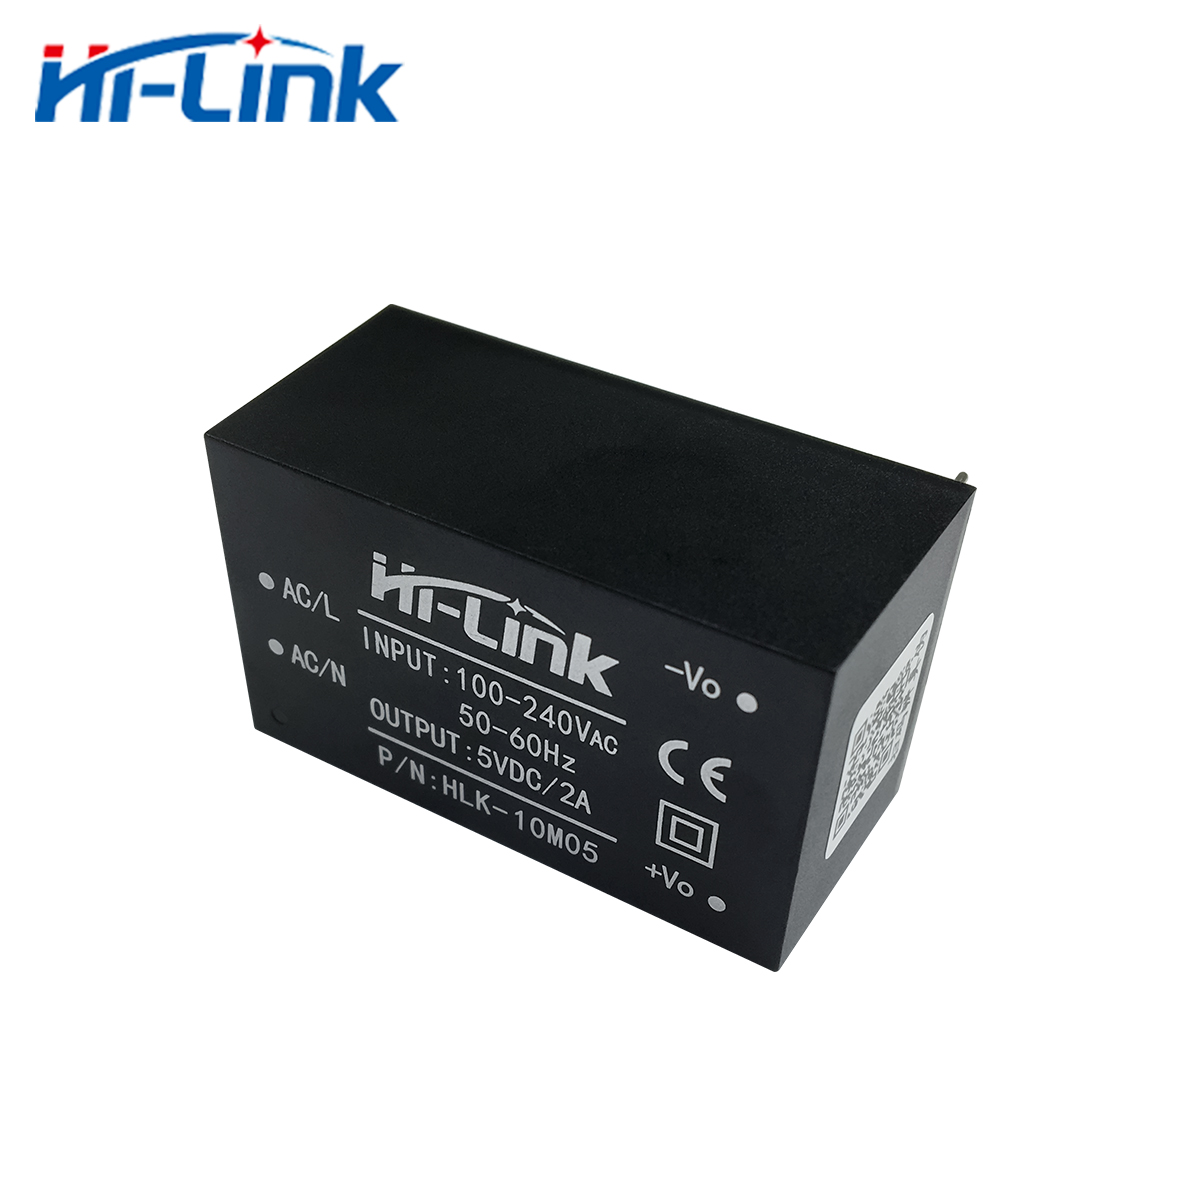 Free shipping Hi-Link new 5pcs 220v 5V 2A 10W AC DC isolated switching step down power supply module AC DC converter HLK-10M05